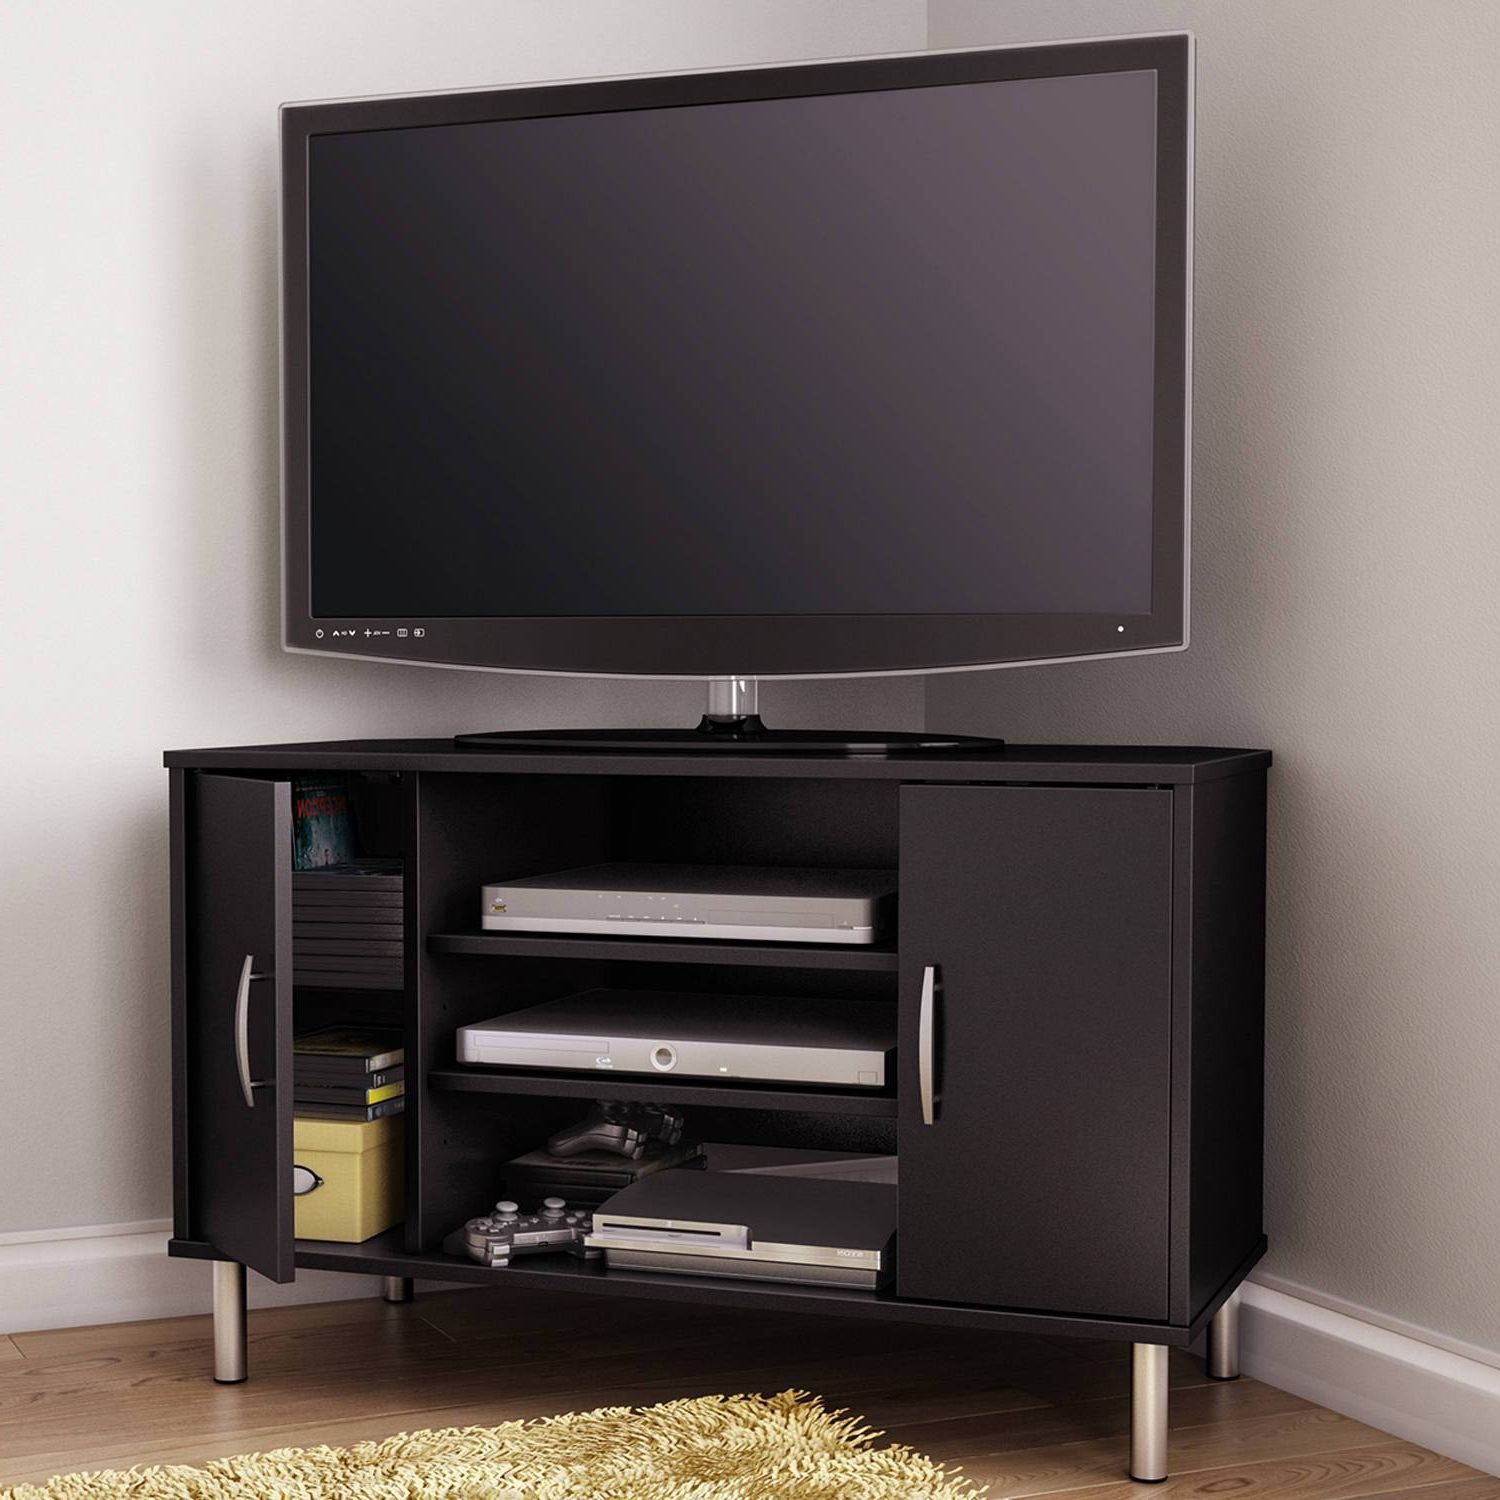 Widely Used Triangular Tv Stands Throughout Storage Cabinets Ideas : Corner Tv Stand Designs Choosing The (View 1 of 20)